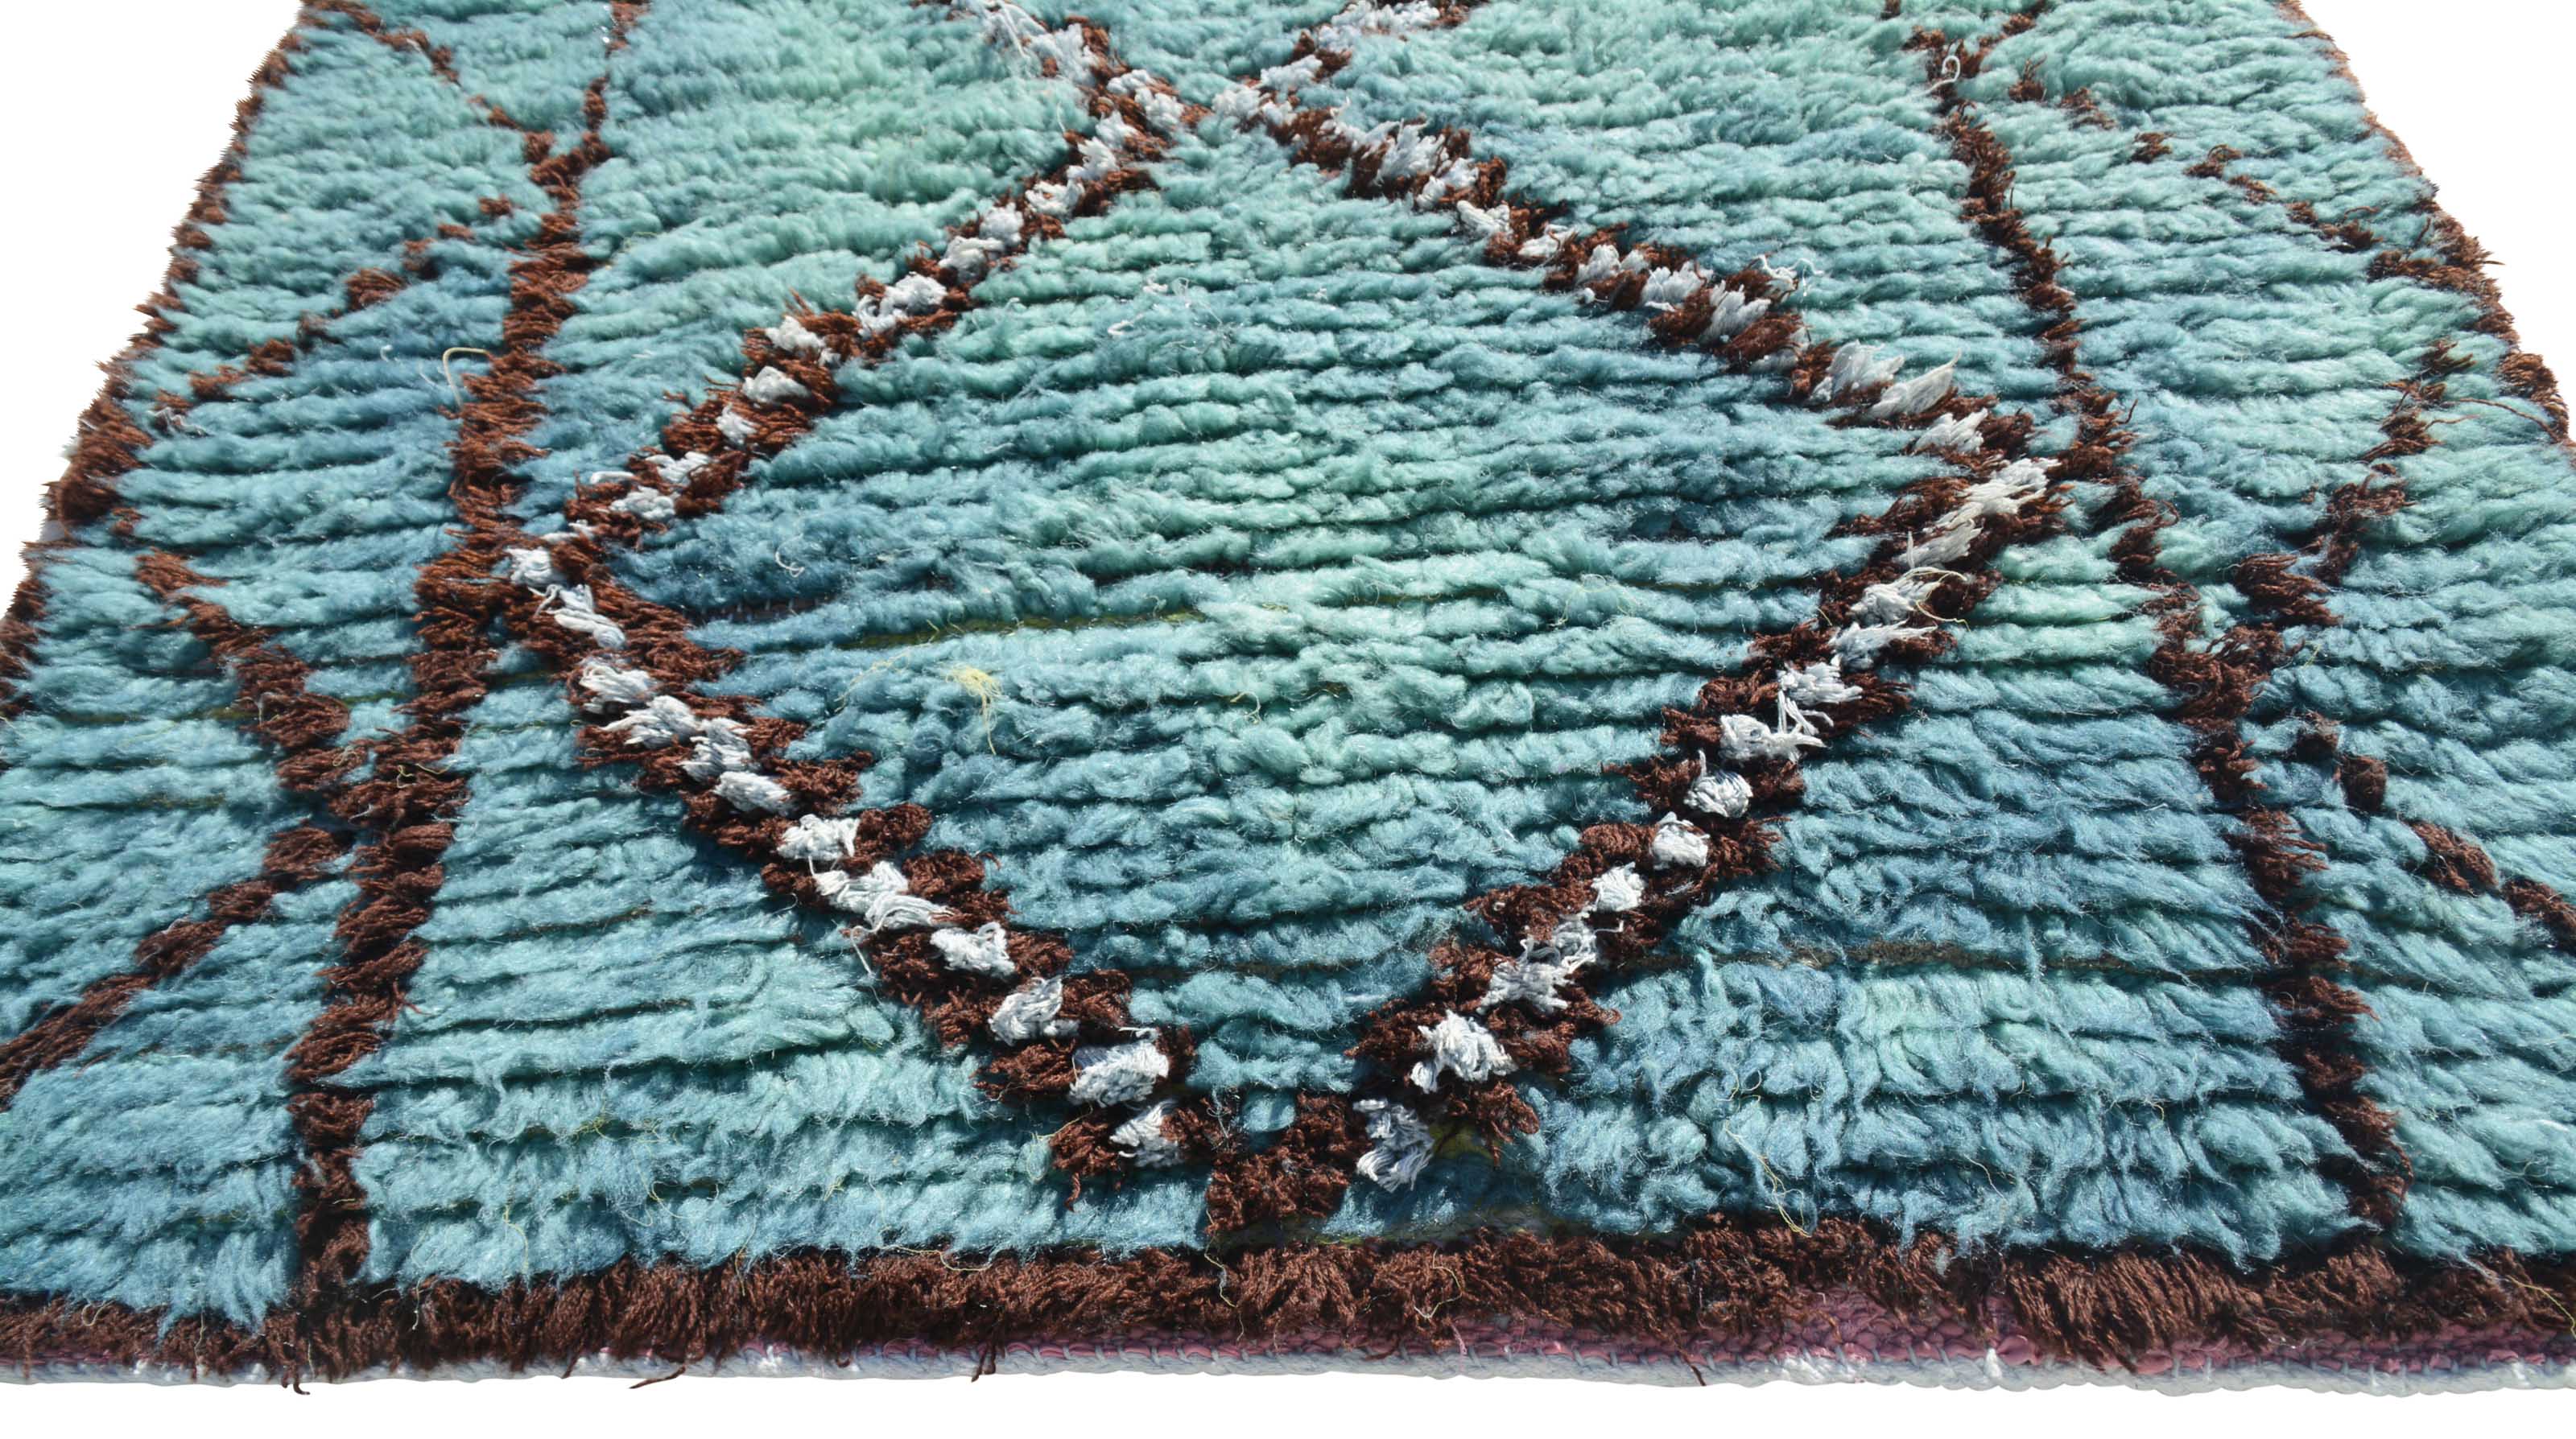 Rugs Shop Vintage Runner Rugs | Purple And Teal Rugs Illuminate Collective